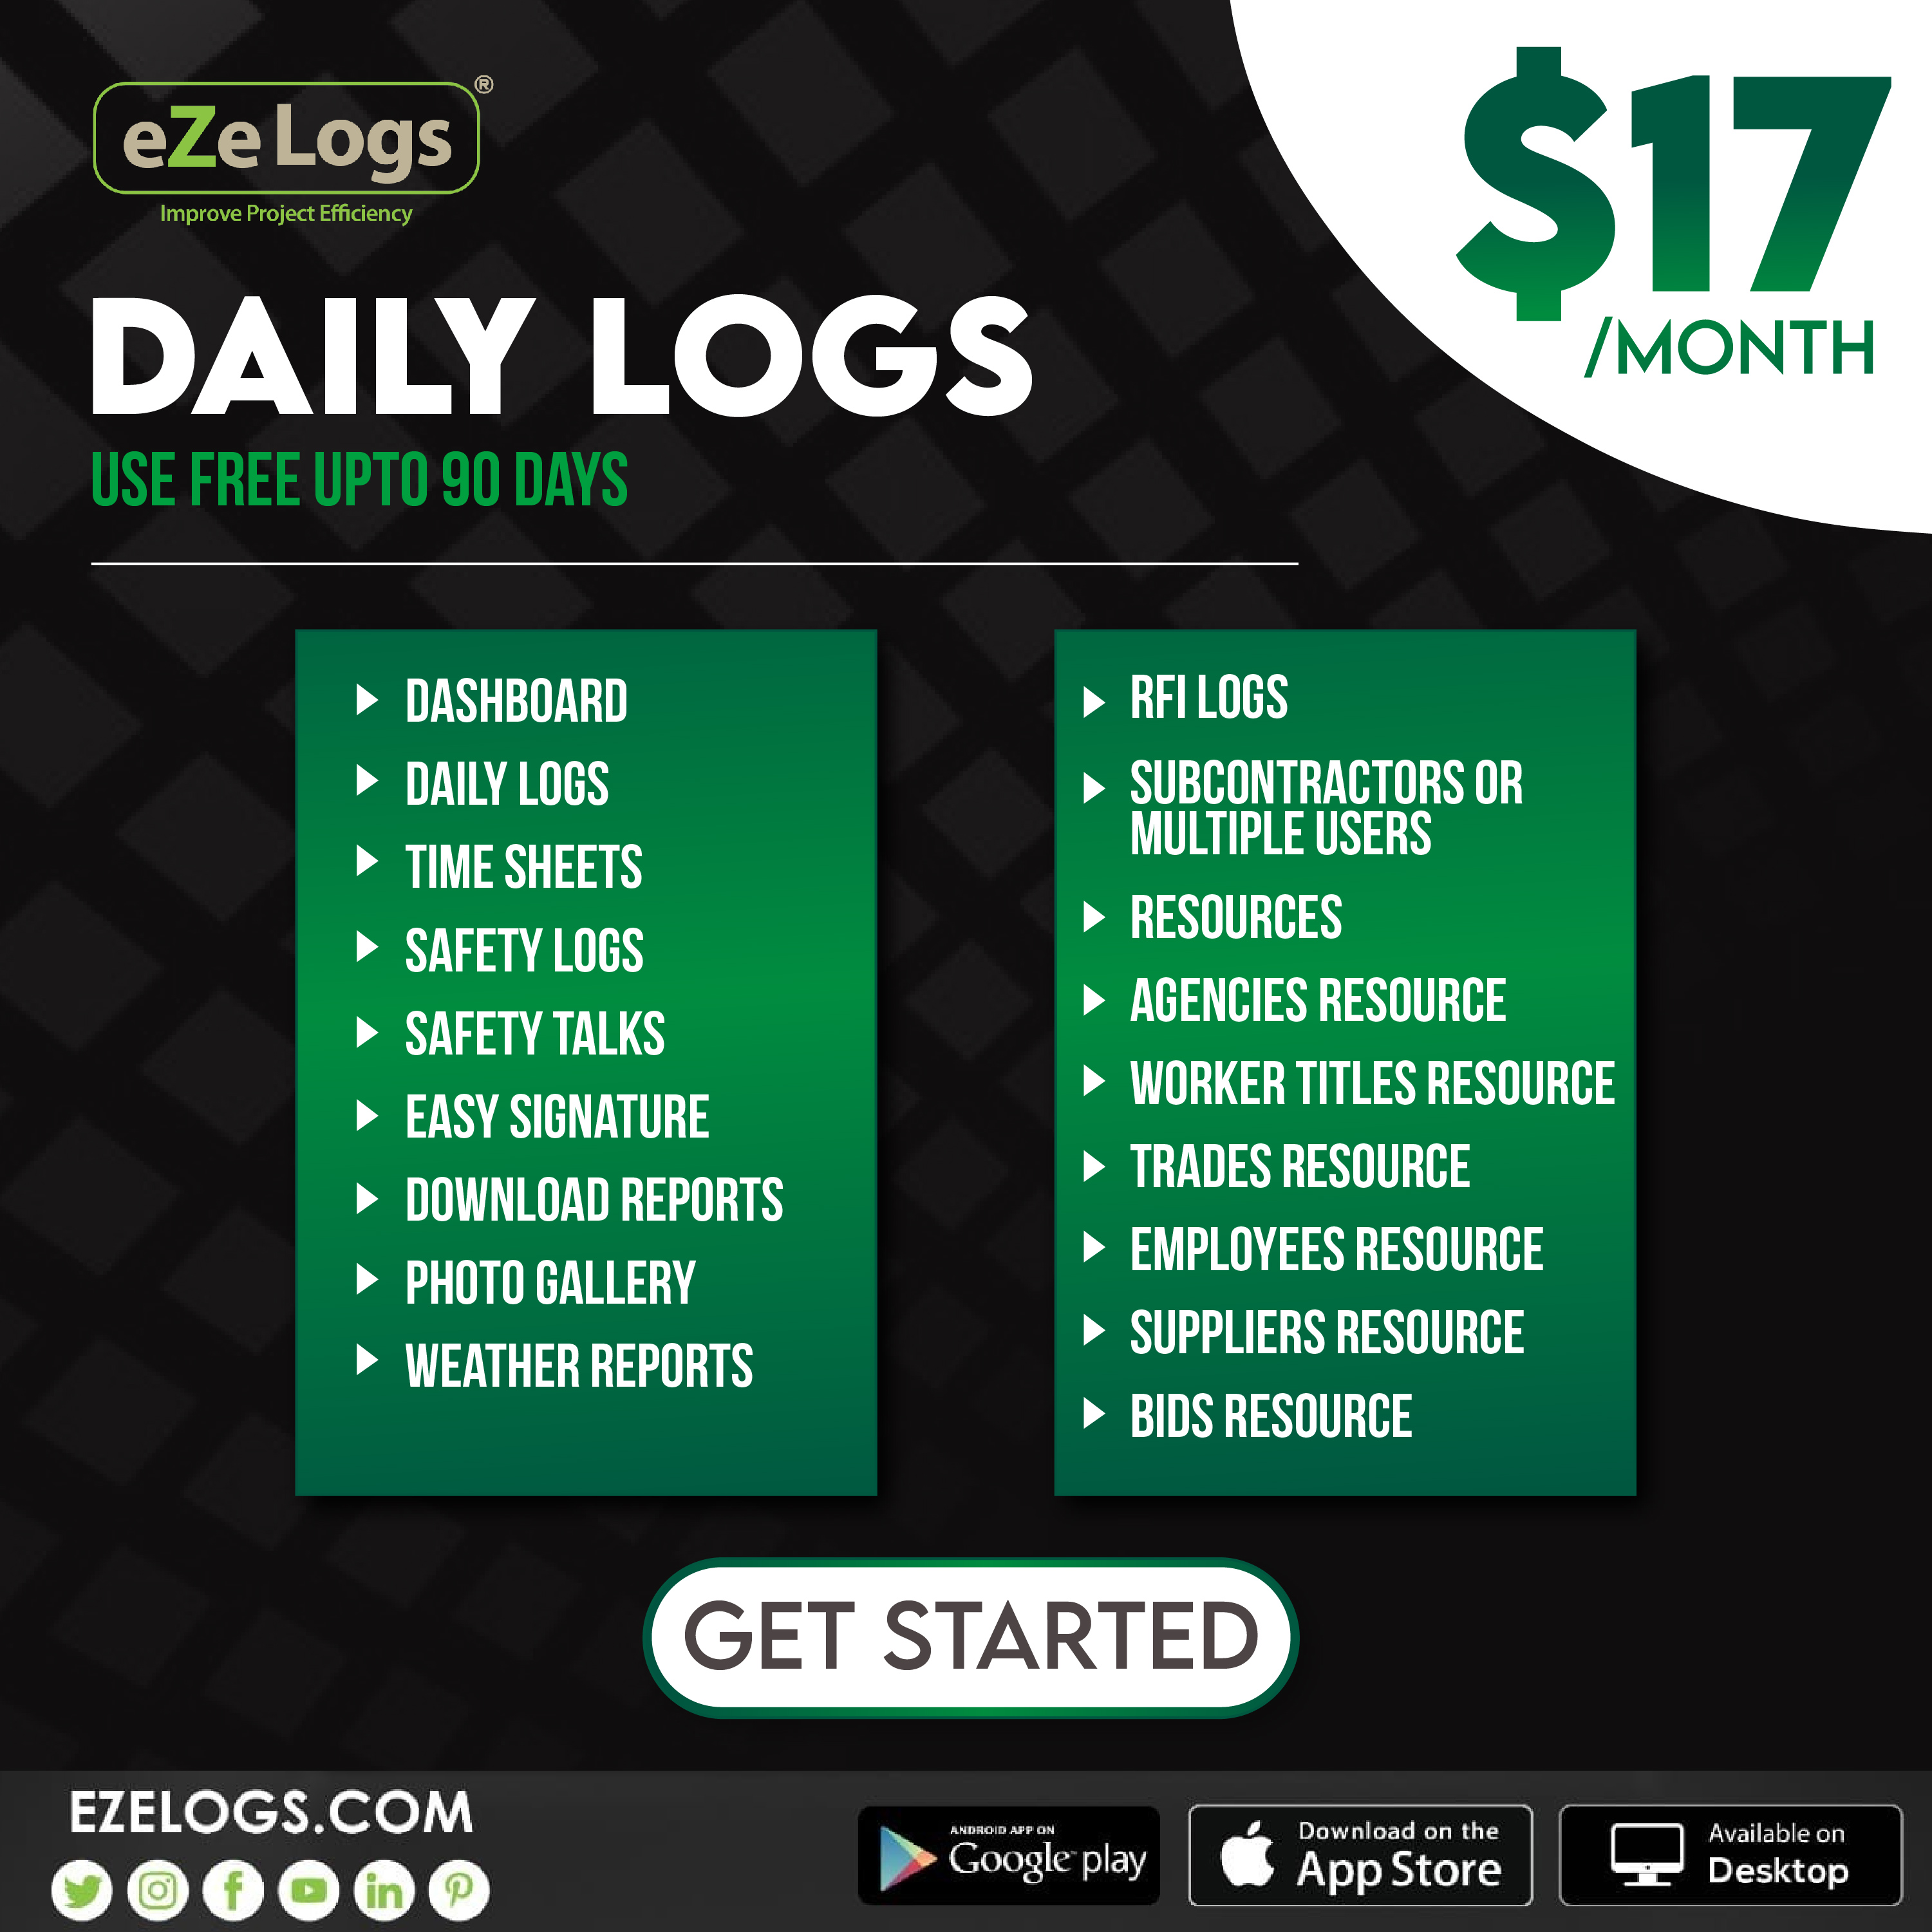 Daily Logs- Create Time sheets, enter construction workers data, material, equipment used, weather, job site conditions, information, photos, quality control check list, generate reports, email reports to project stake holders and track labor hours